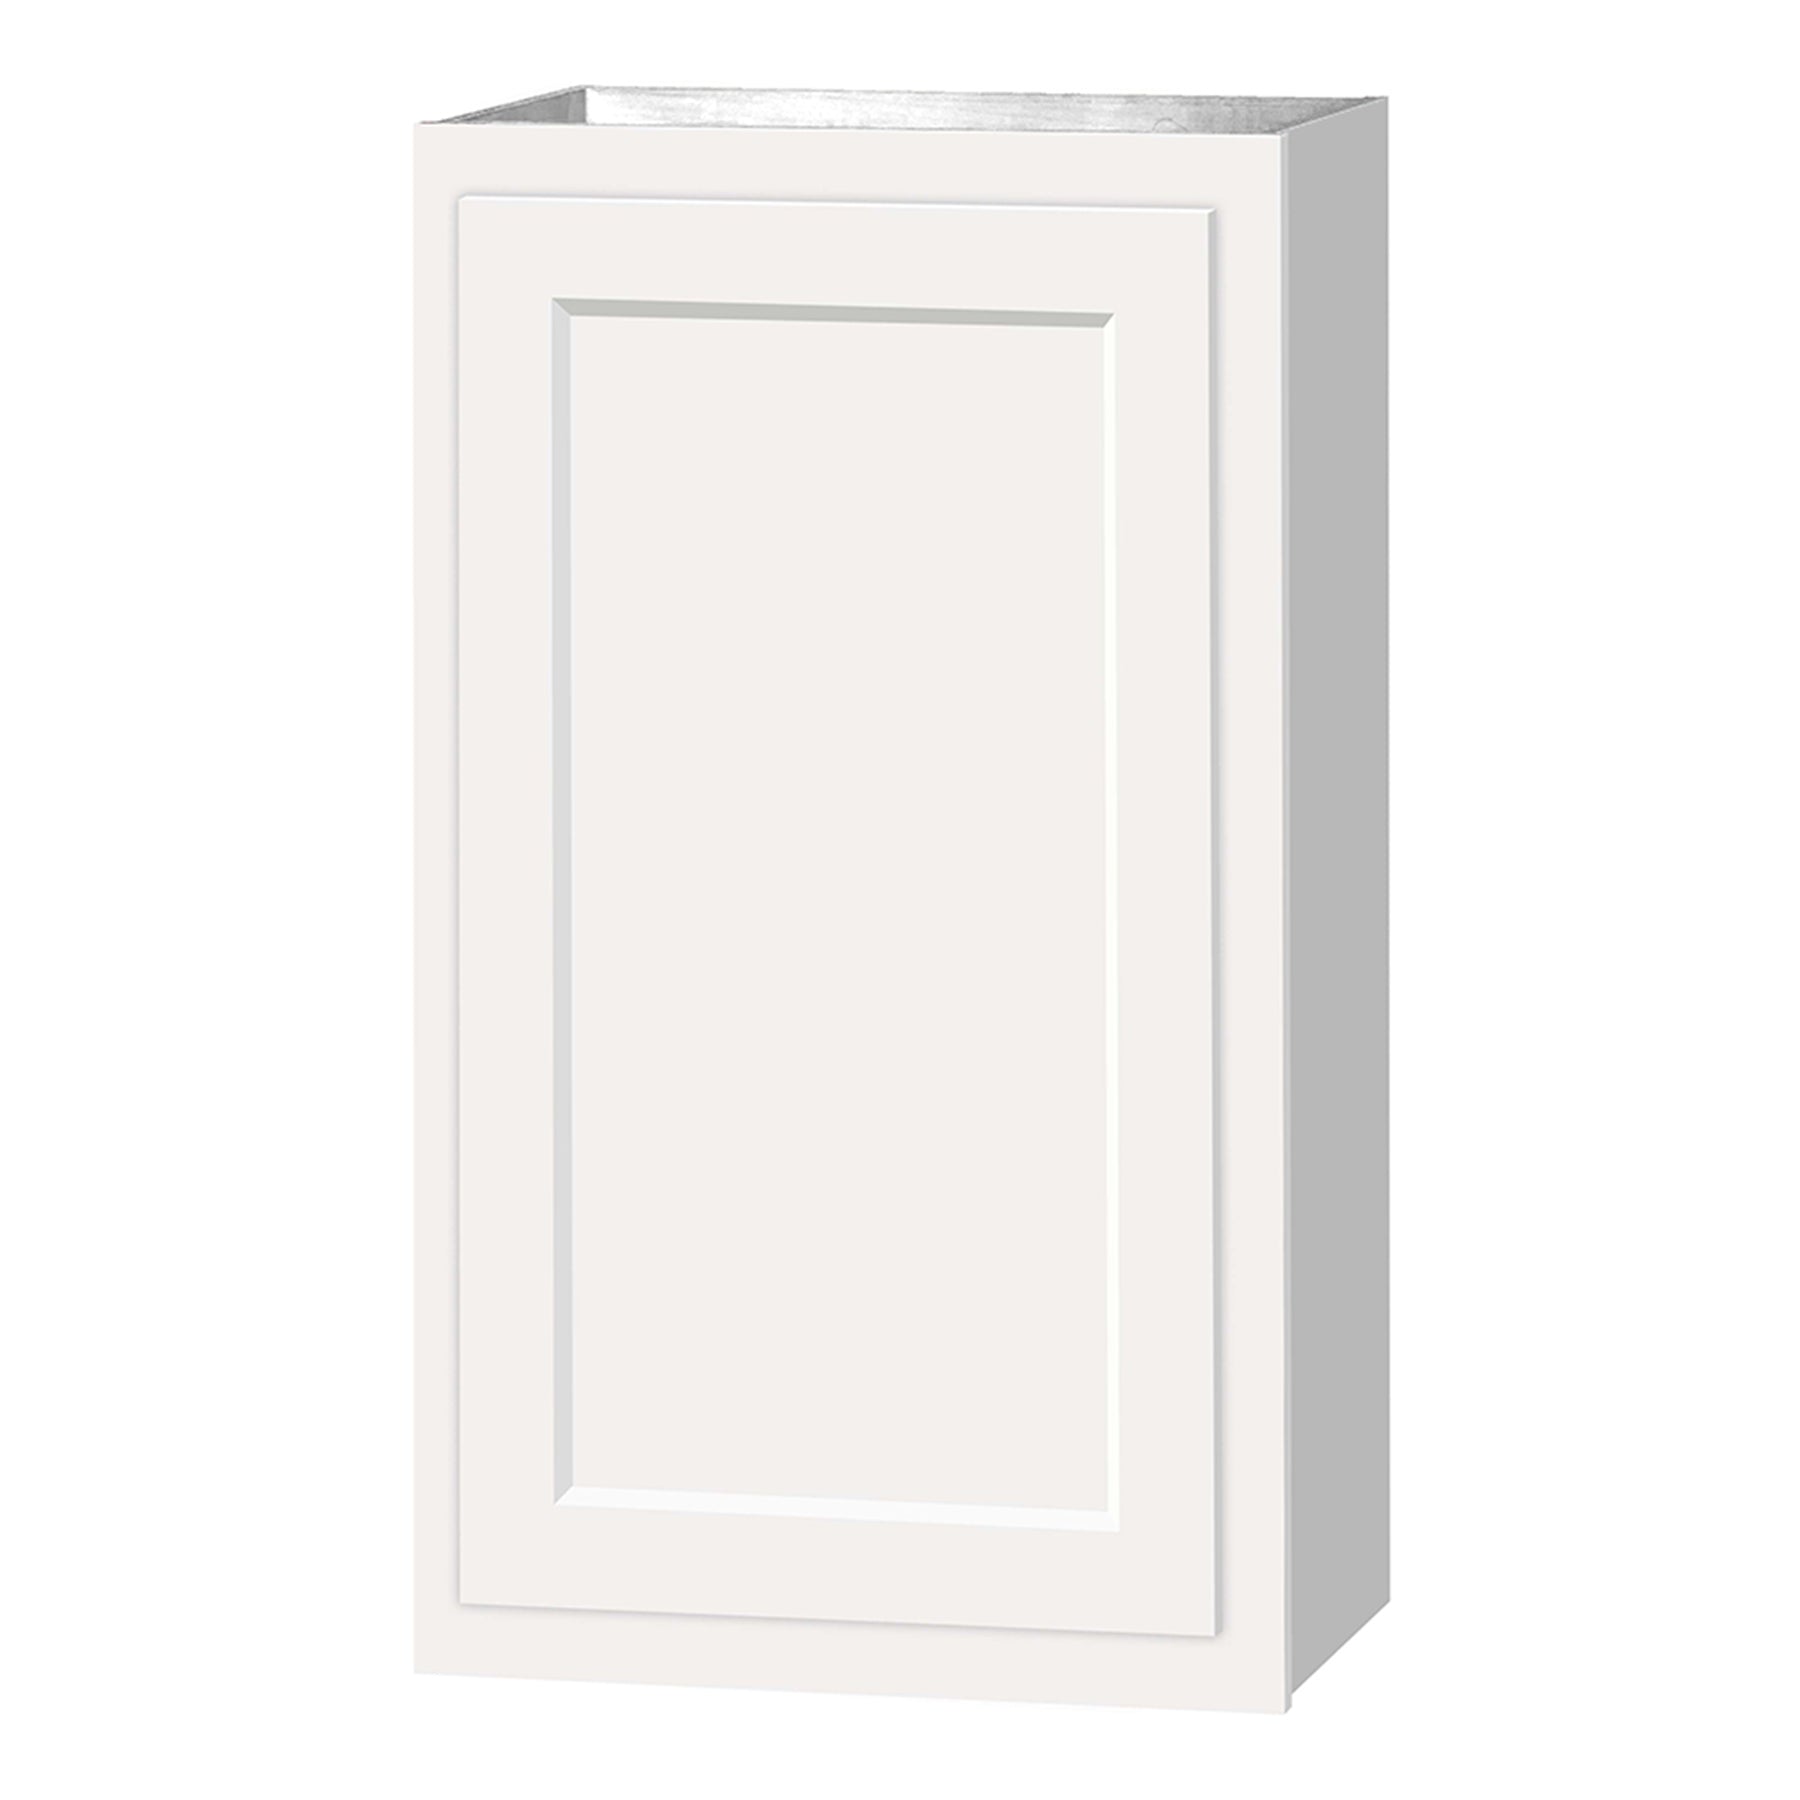 36 inch Wall Cabinets - Dwhite Shaker - 21 Inch W x 36 Inch H x 12 Inch D